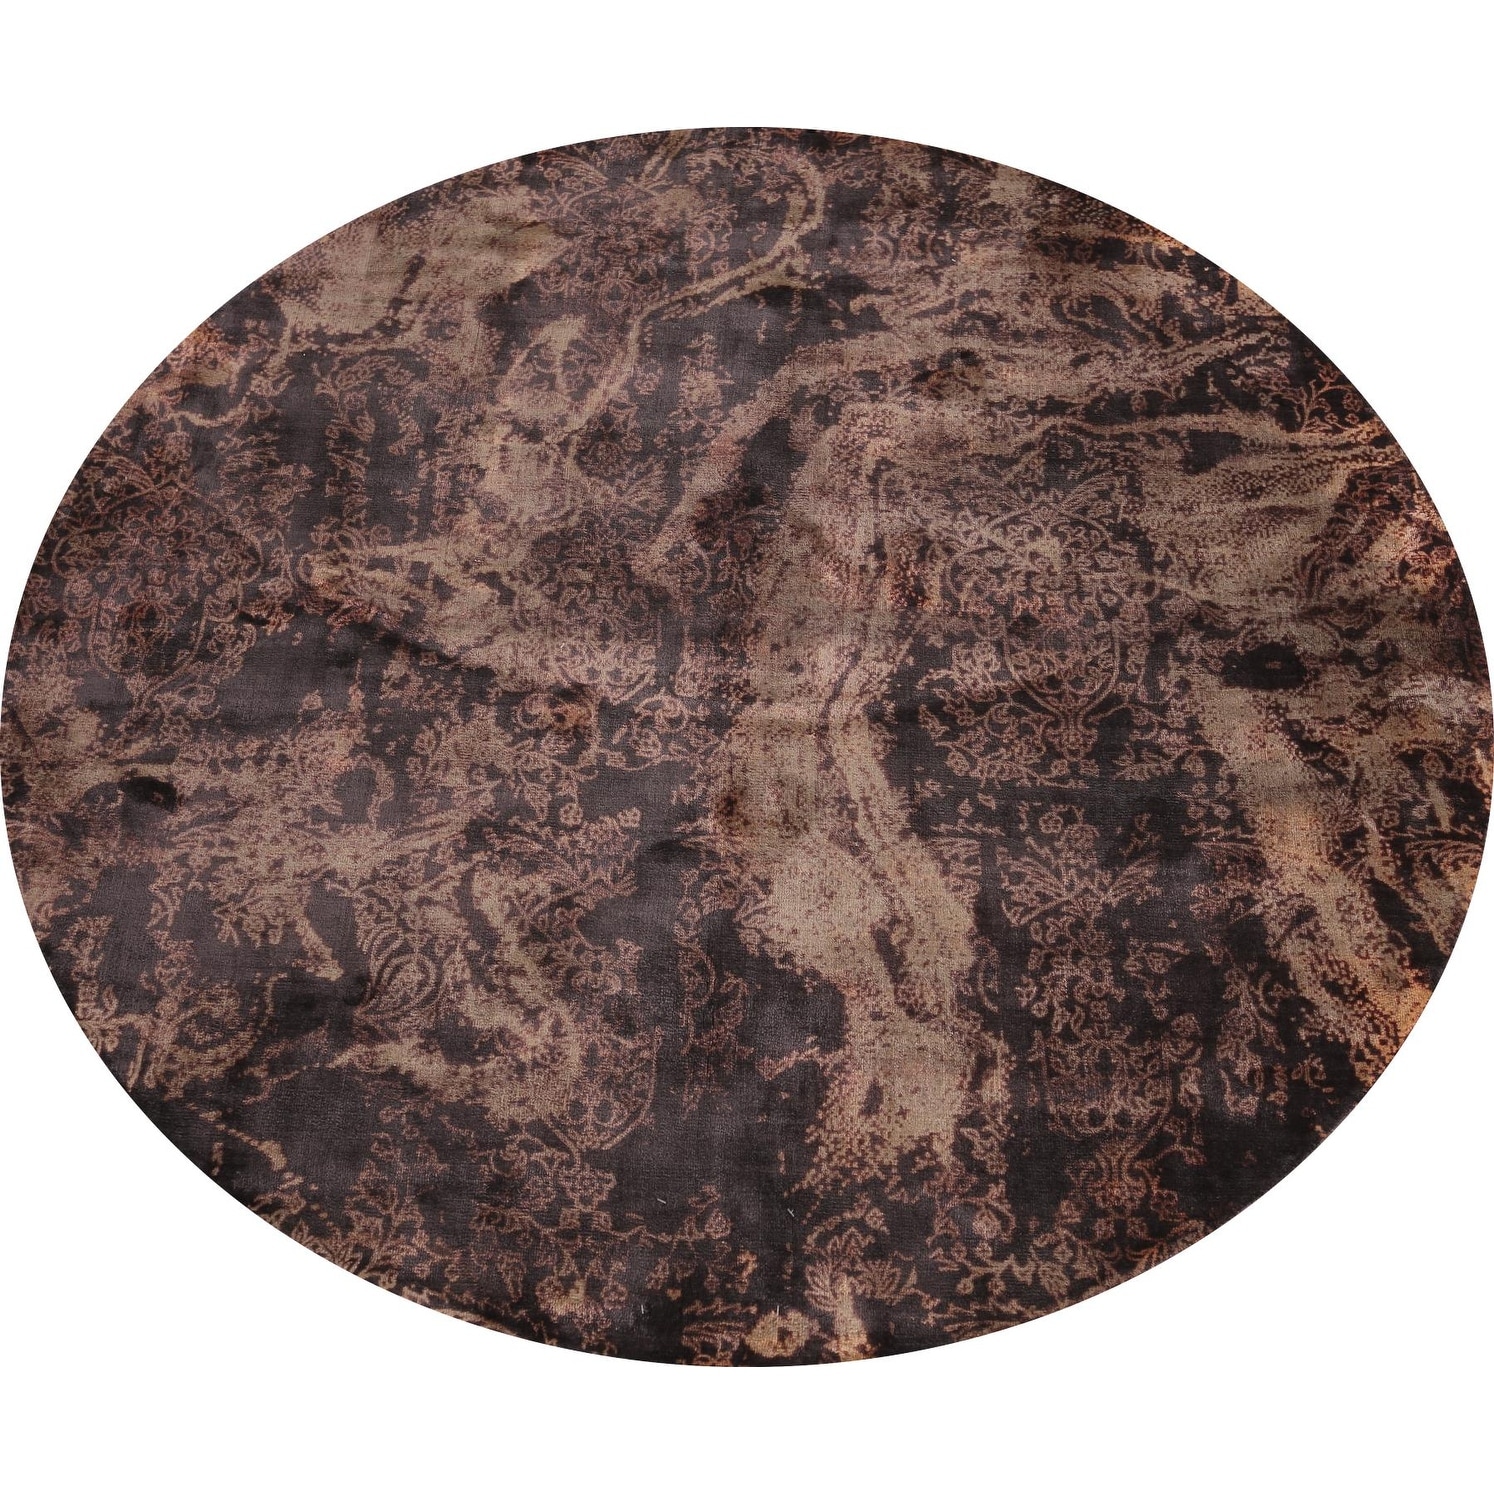 Contemporary Brown Abstract Round Rug Handmade Wool Carpet - 5'2 X 5'0